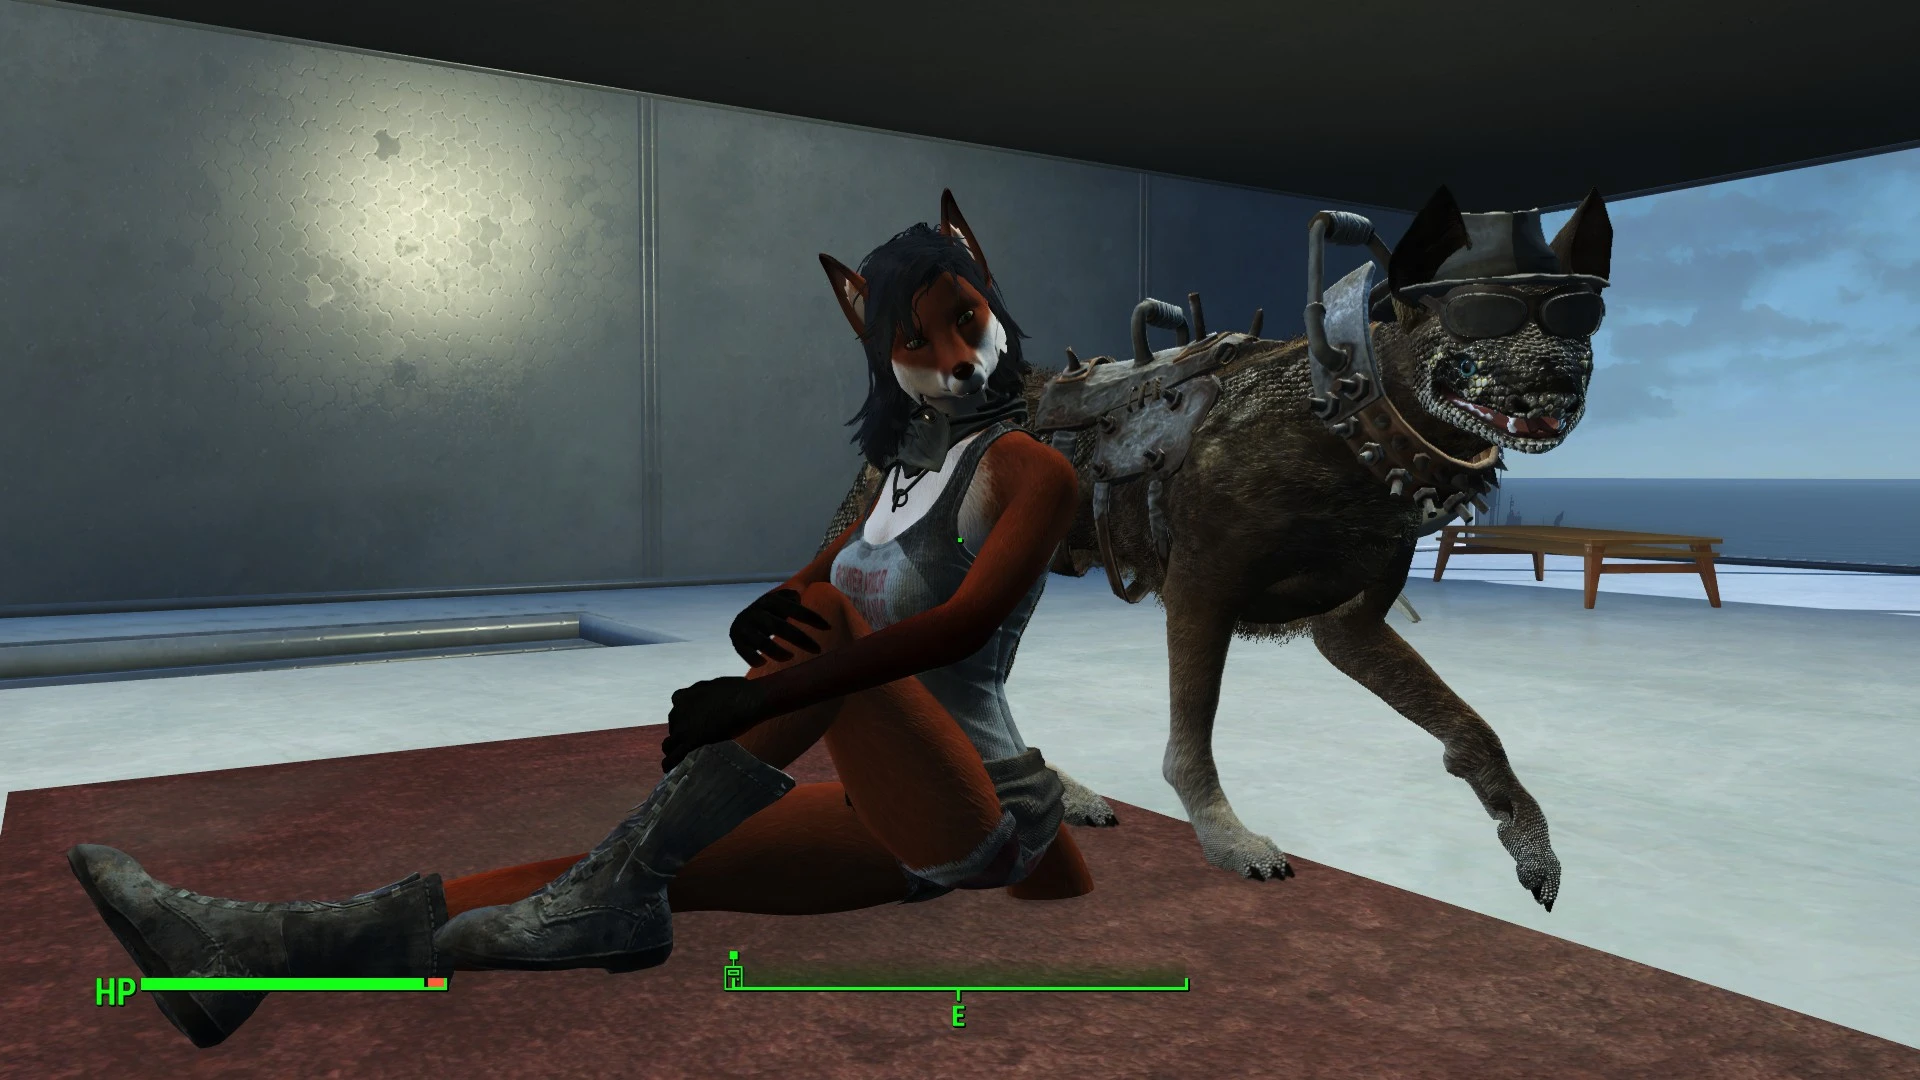 Vulpine Race At Fallout 4 Nexus Mods And Community.